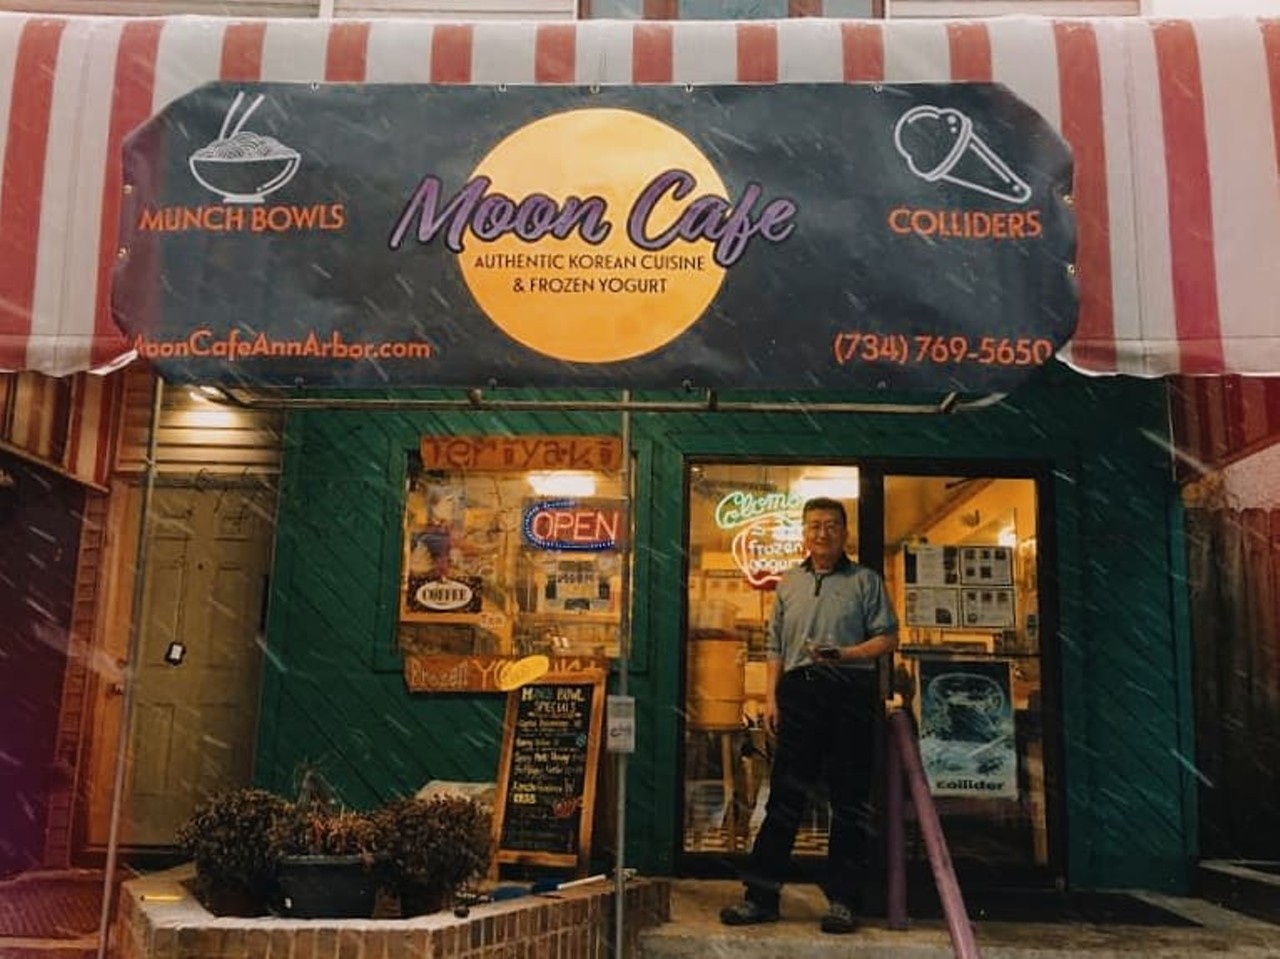 Moon Cafe
812 S. State St.; 734-769-5650;  mooncafeannarbor.com 
While this small shack-like building may seem to be just a frozen yogurt spot, it also offers traditional Korean street food including dukbokki udon, bibimbap, and japchae.